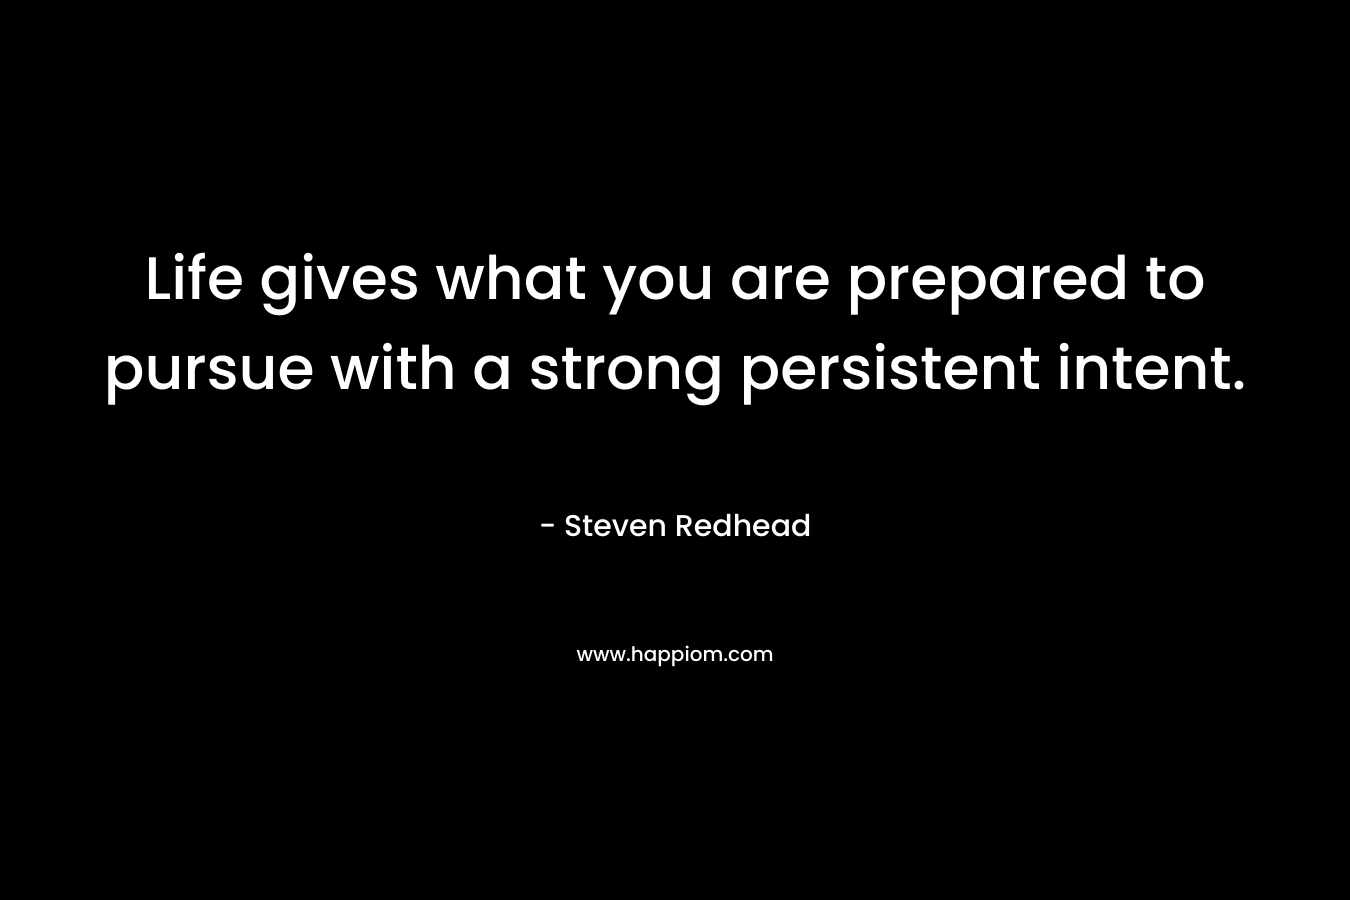 Life gives what you are prepared to pursue with a strong persistent intent.